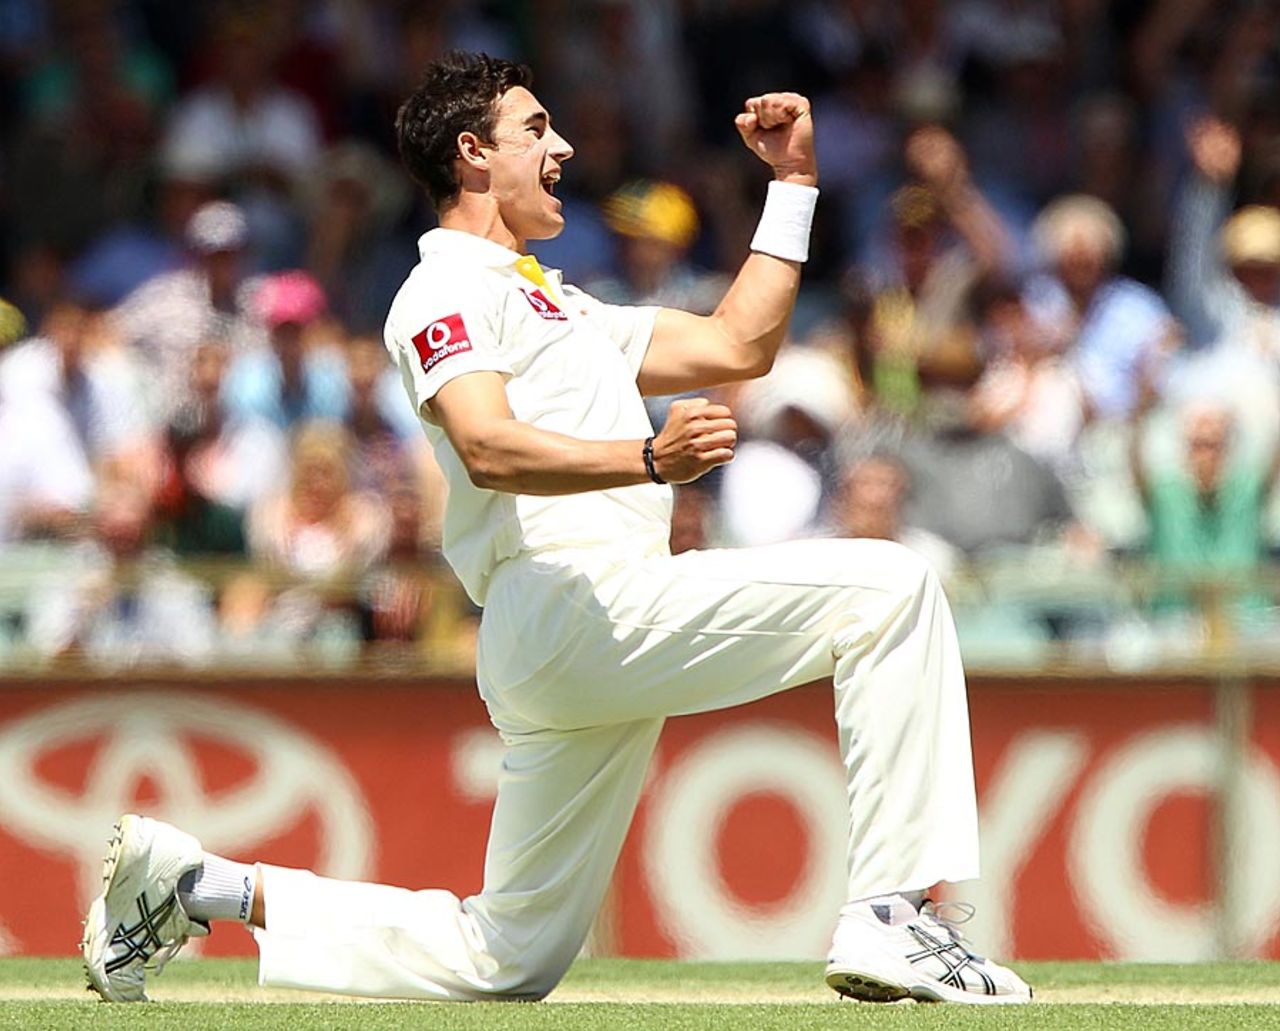 Mitchell Starc celebrates after getting Alviro Petersen bowled, Australia v South Africa, 3rd Test, Perth, 1st day, November 30, 2012